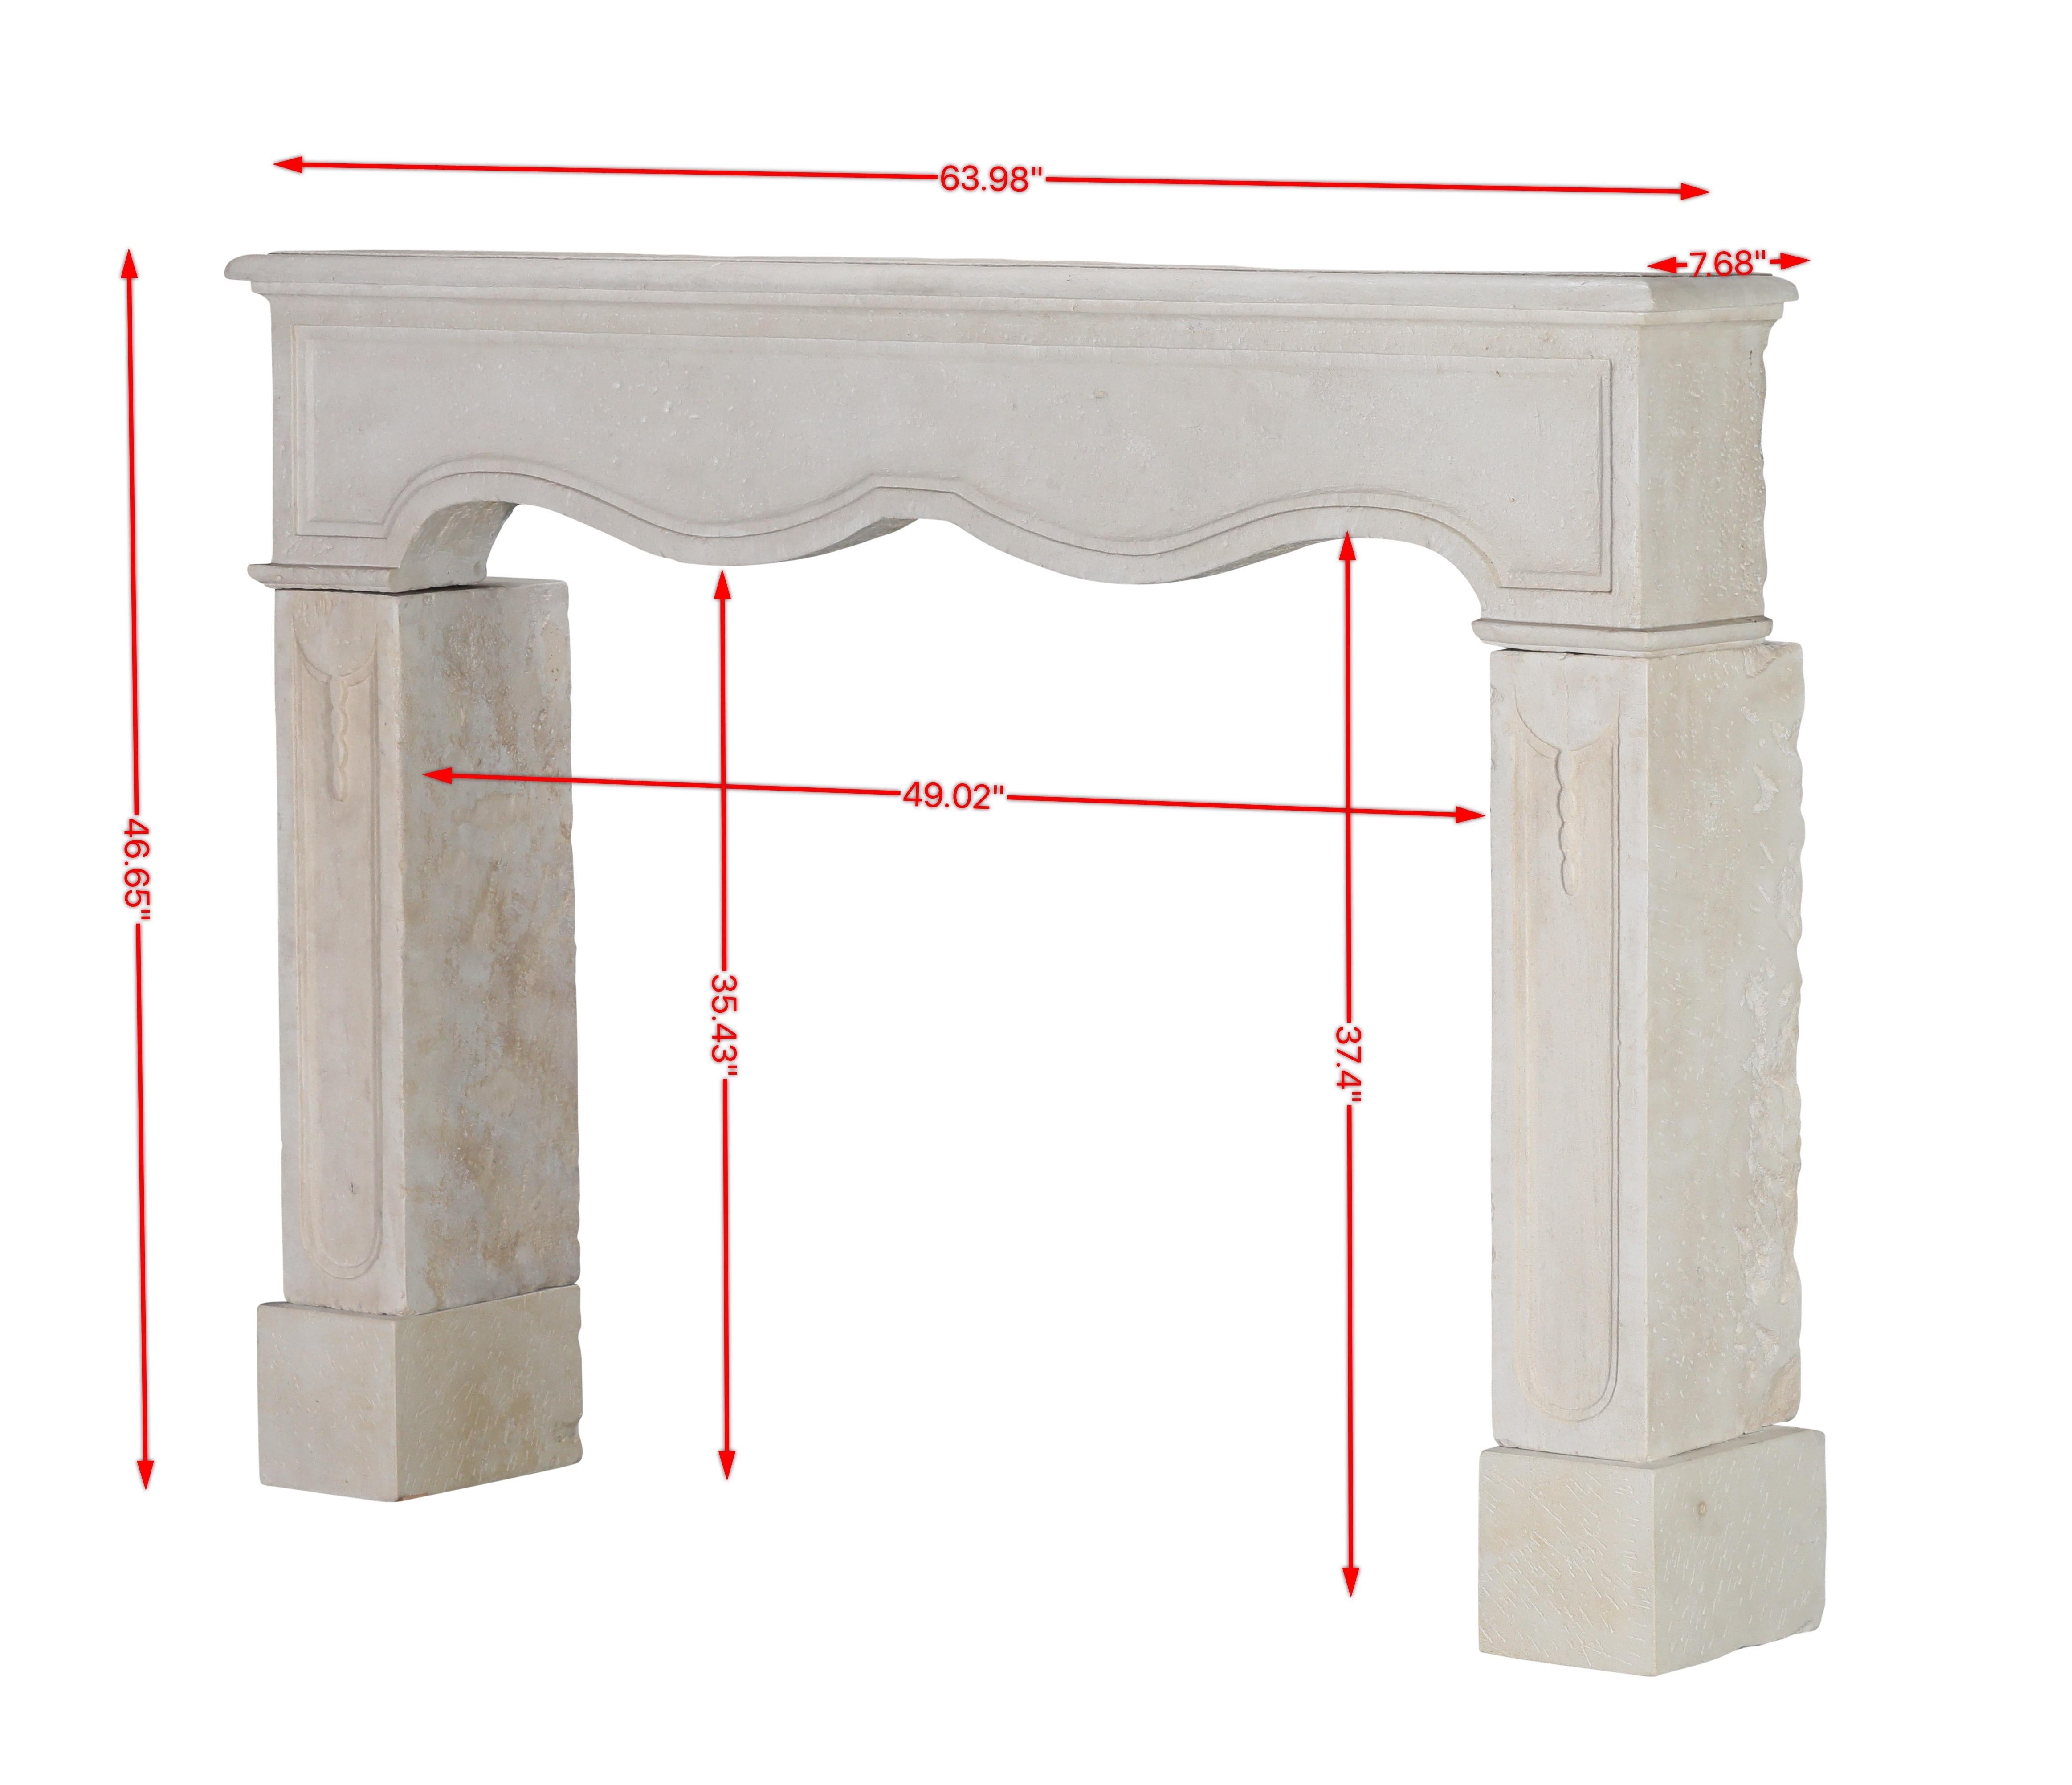 Timeless white French limestone fireplace surround with original textured surface. This Louis XIV style chimney piece with nice proportions brings authenticity to any room. Forever a French touch with original curving and artempo wear.
Measurements: